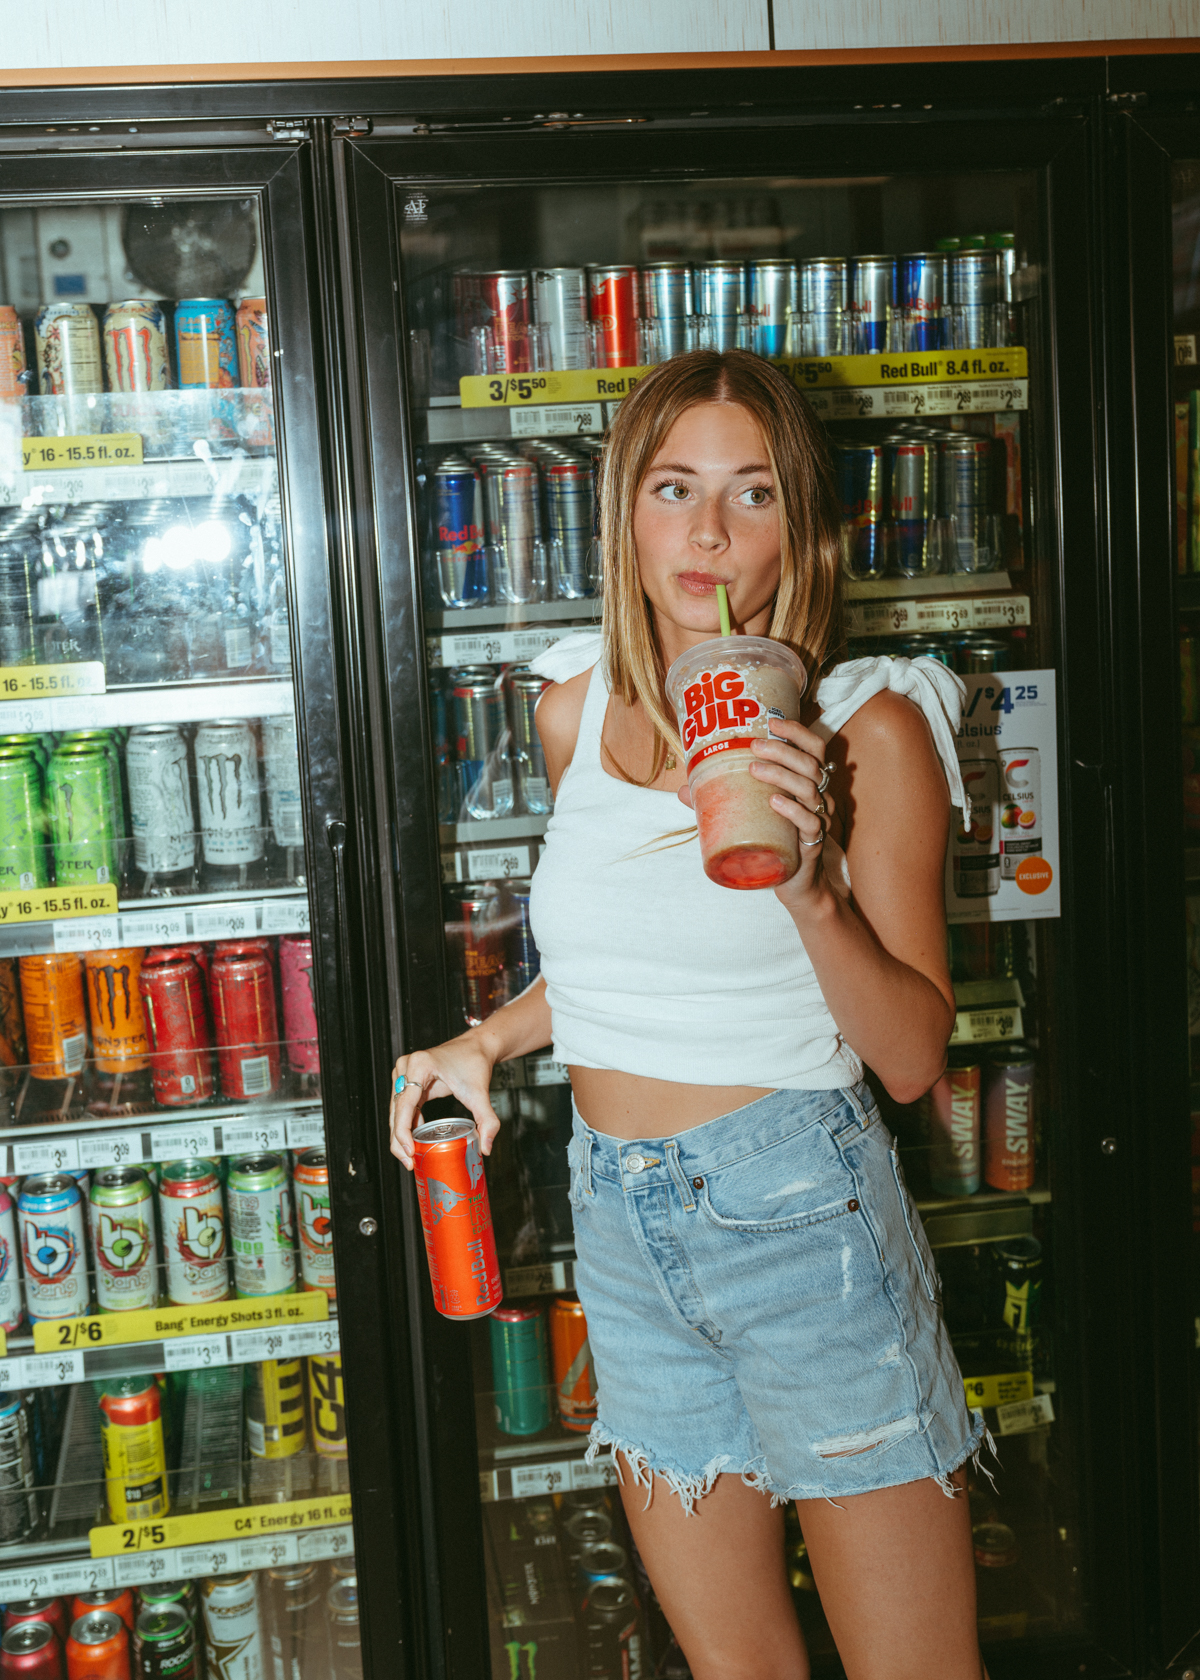 Avery Senior Year an  American Teenage photographed in a convenience store drinking big gulp